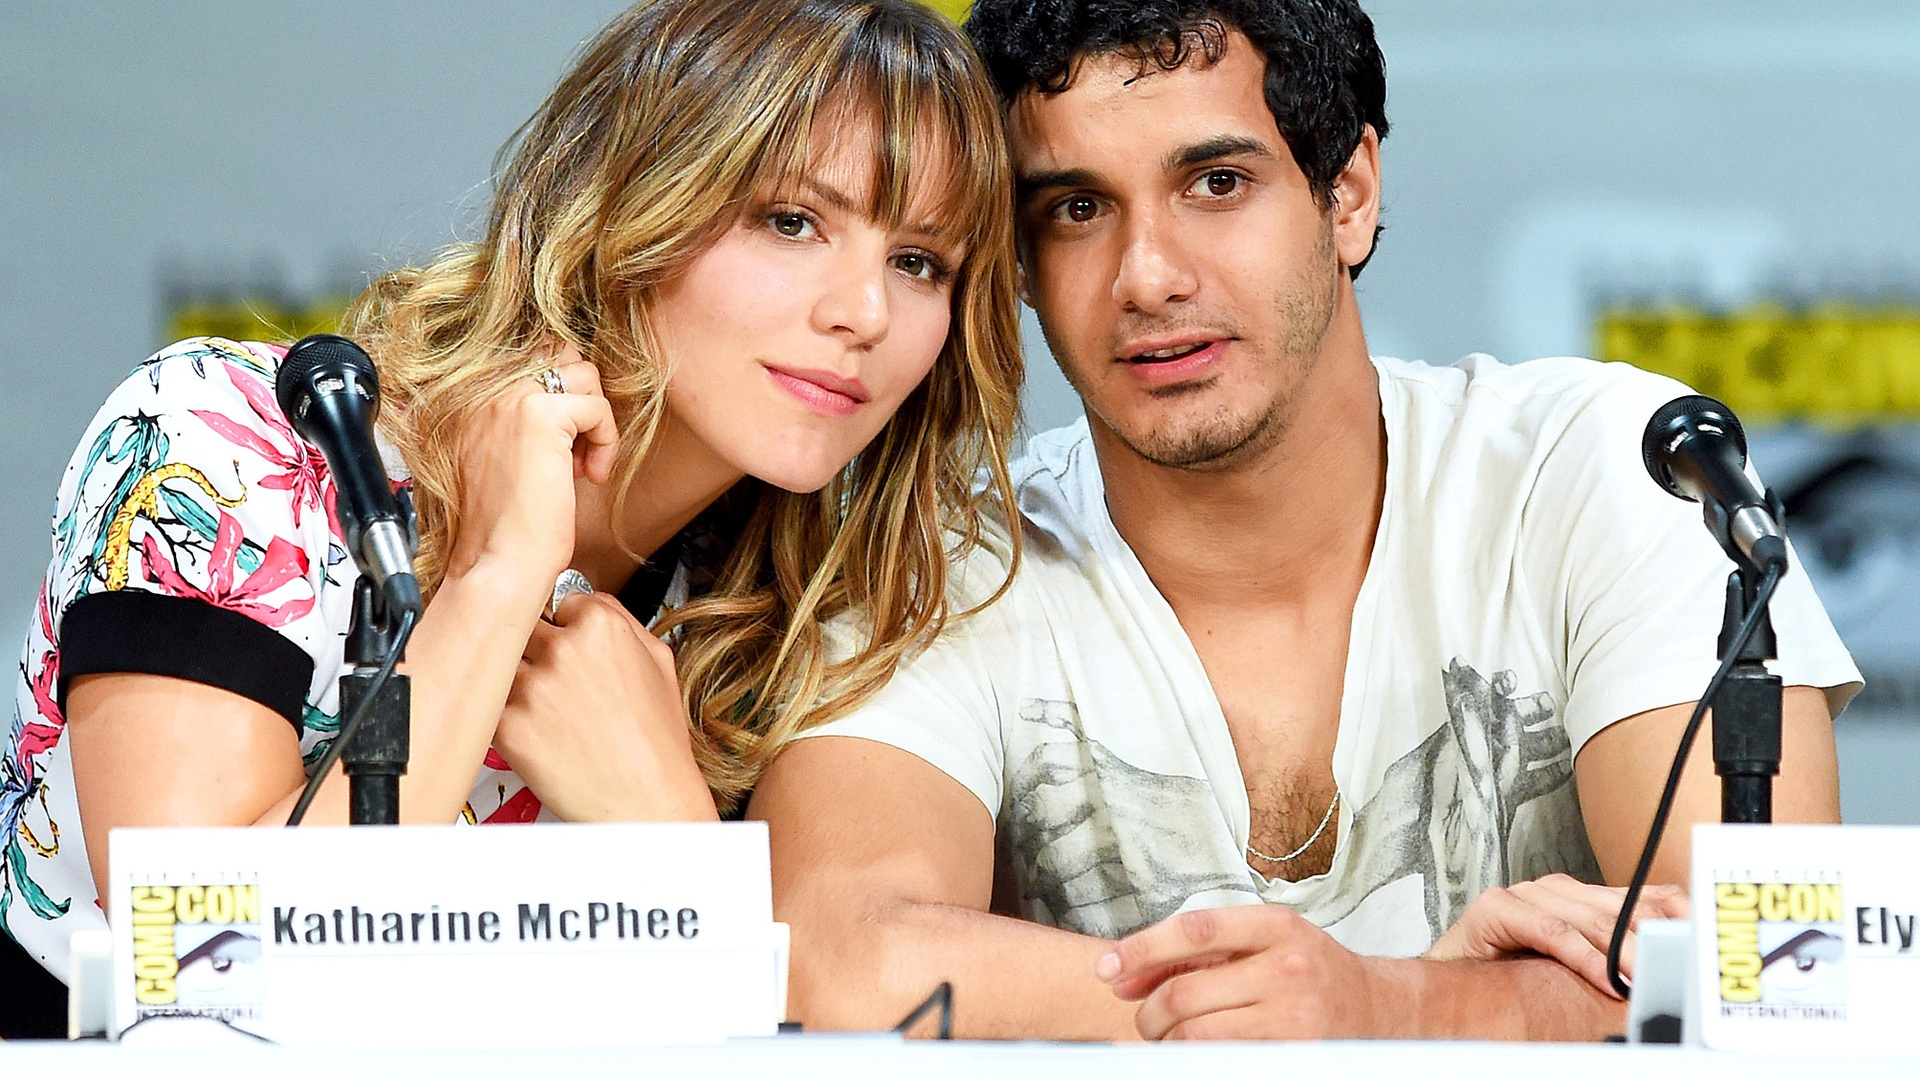 Katharine McPhee and Elyes Gabel for 1920 x 1080 HDTV 1080p resolution